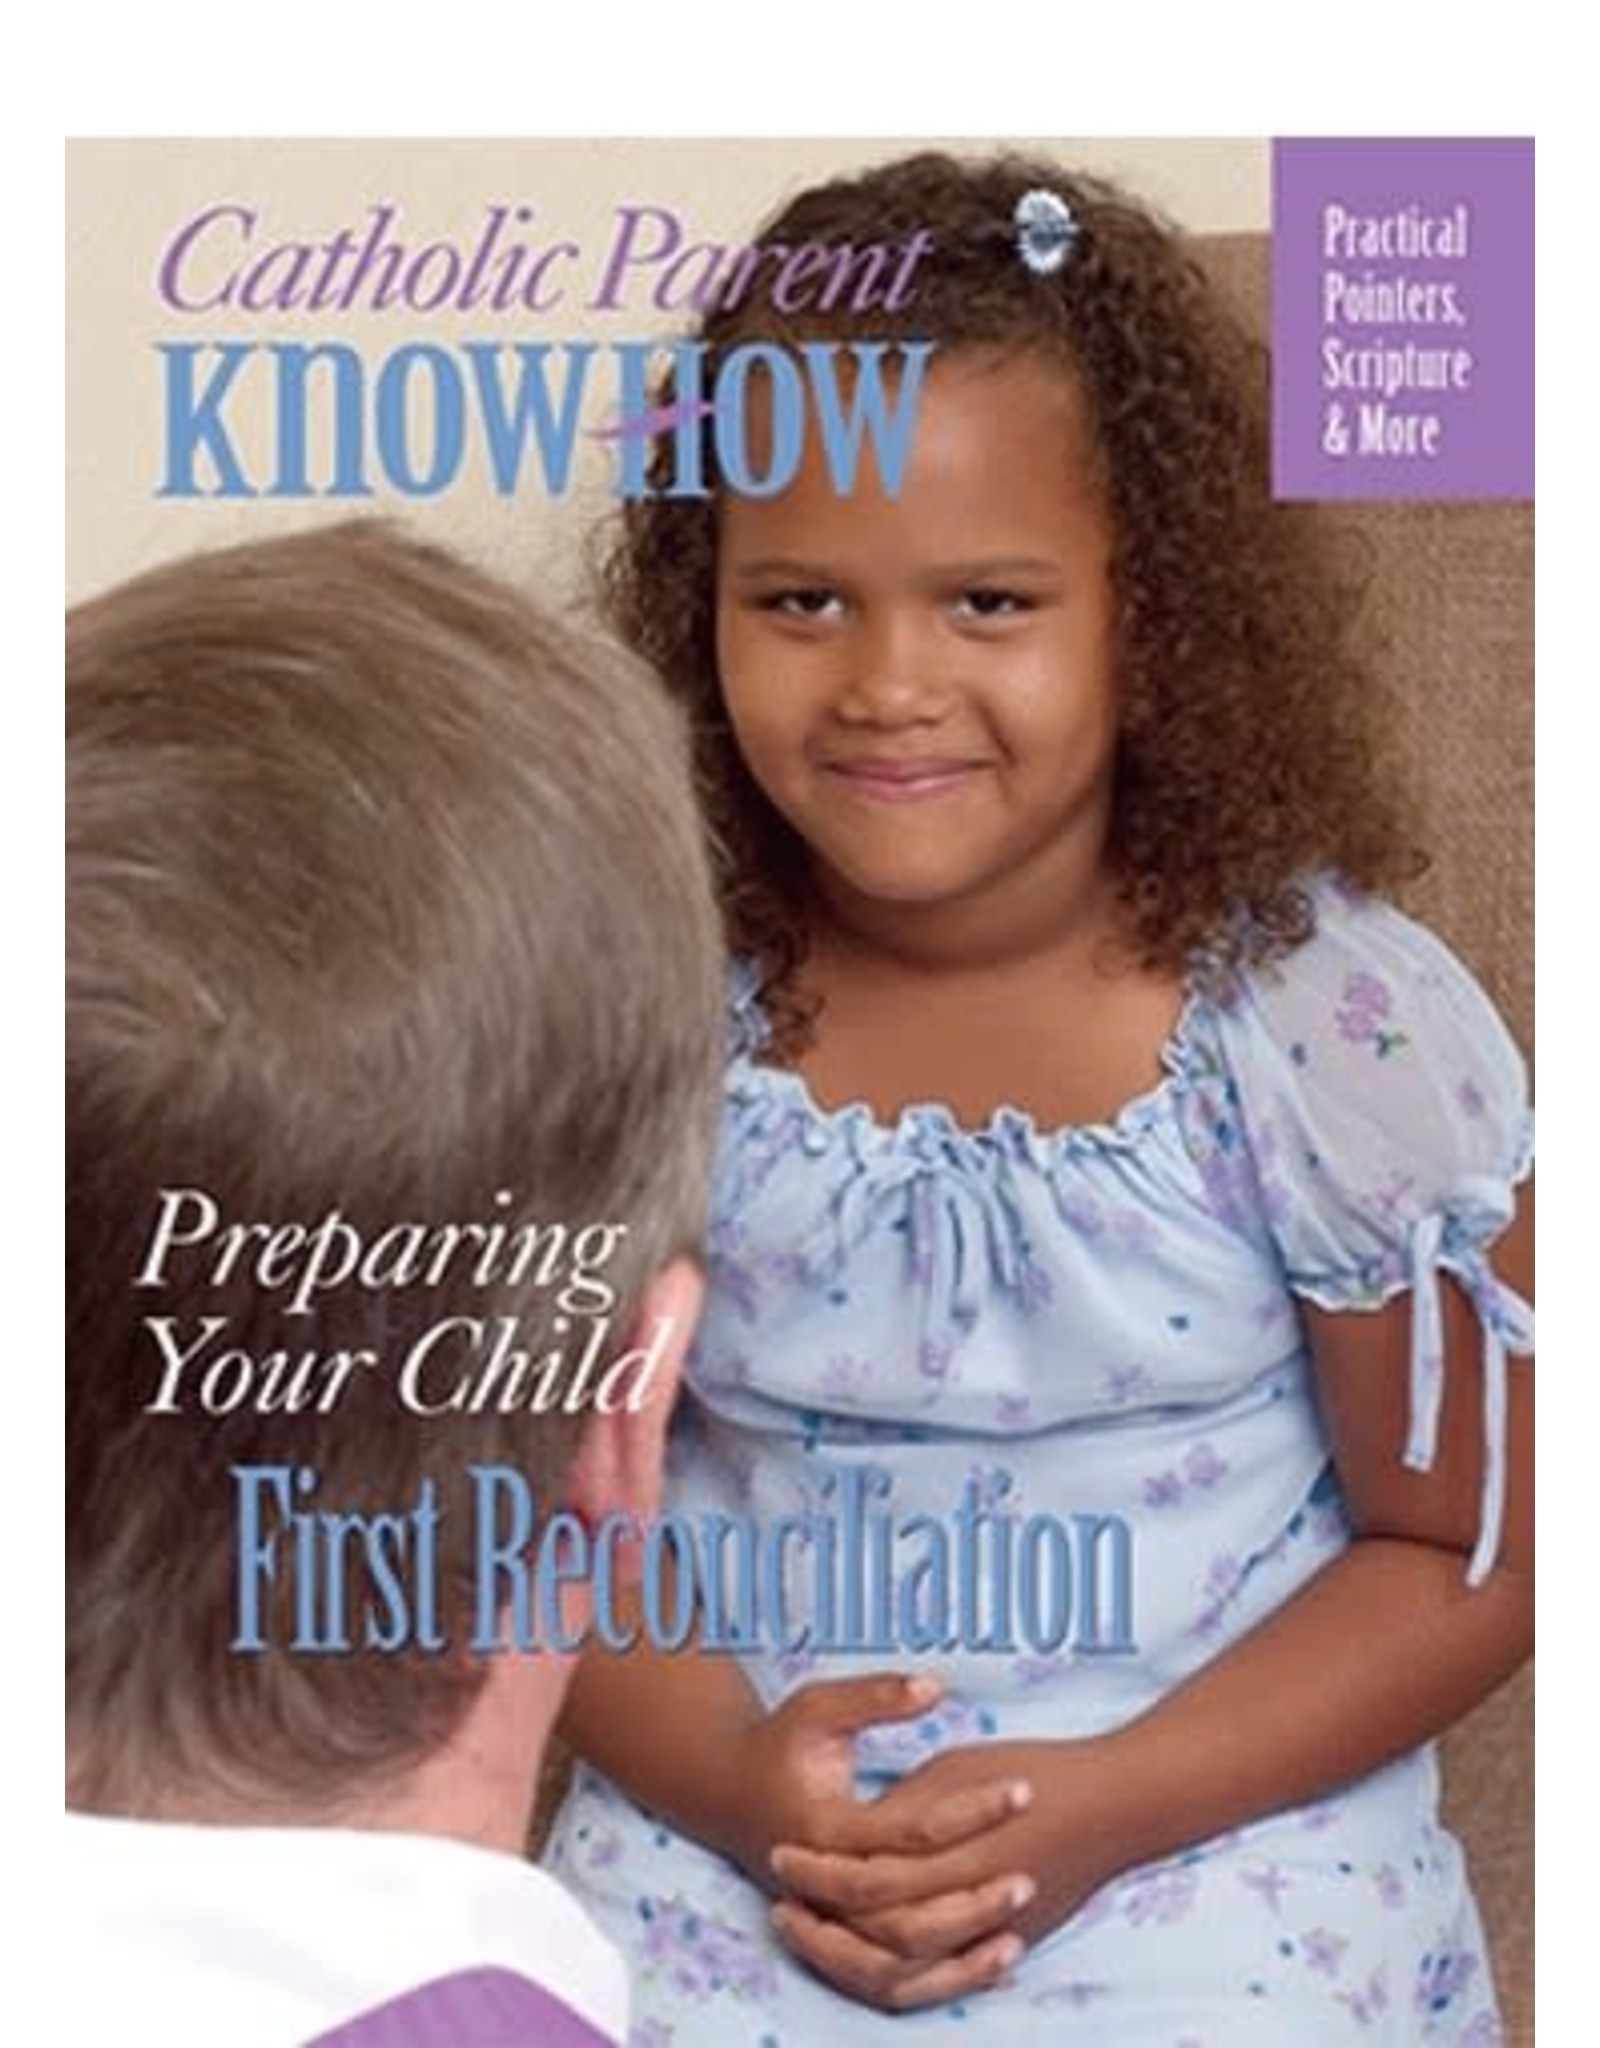 OSV (Our Sunday Visitor) Catholic Parent Know-How: Preparing for Reconciliation